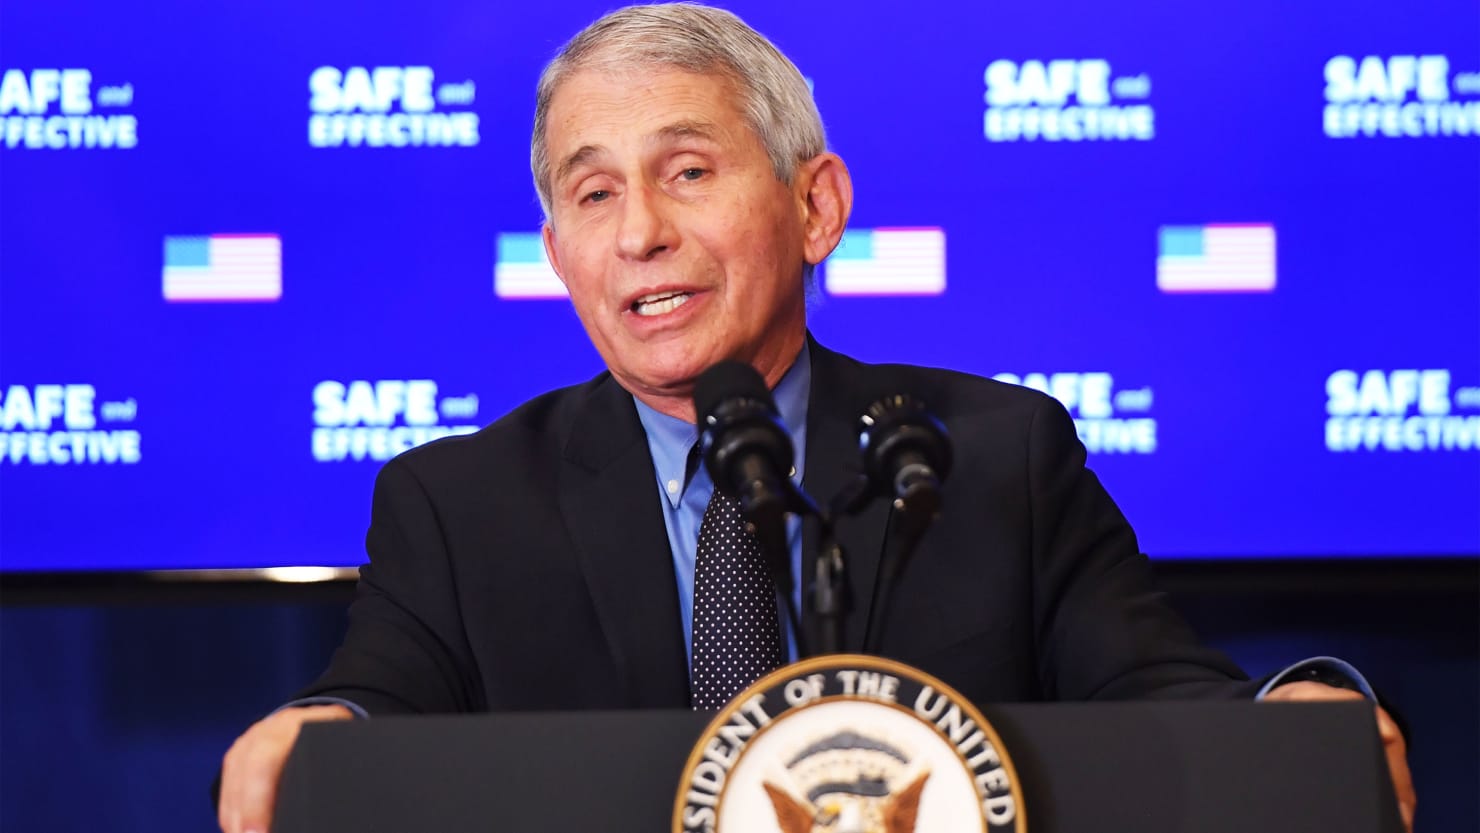 Anthony Fauci clarifies that the COVID vaccine will reach the public by spring